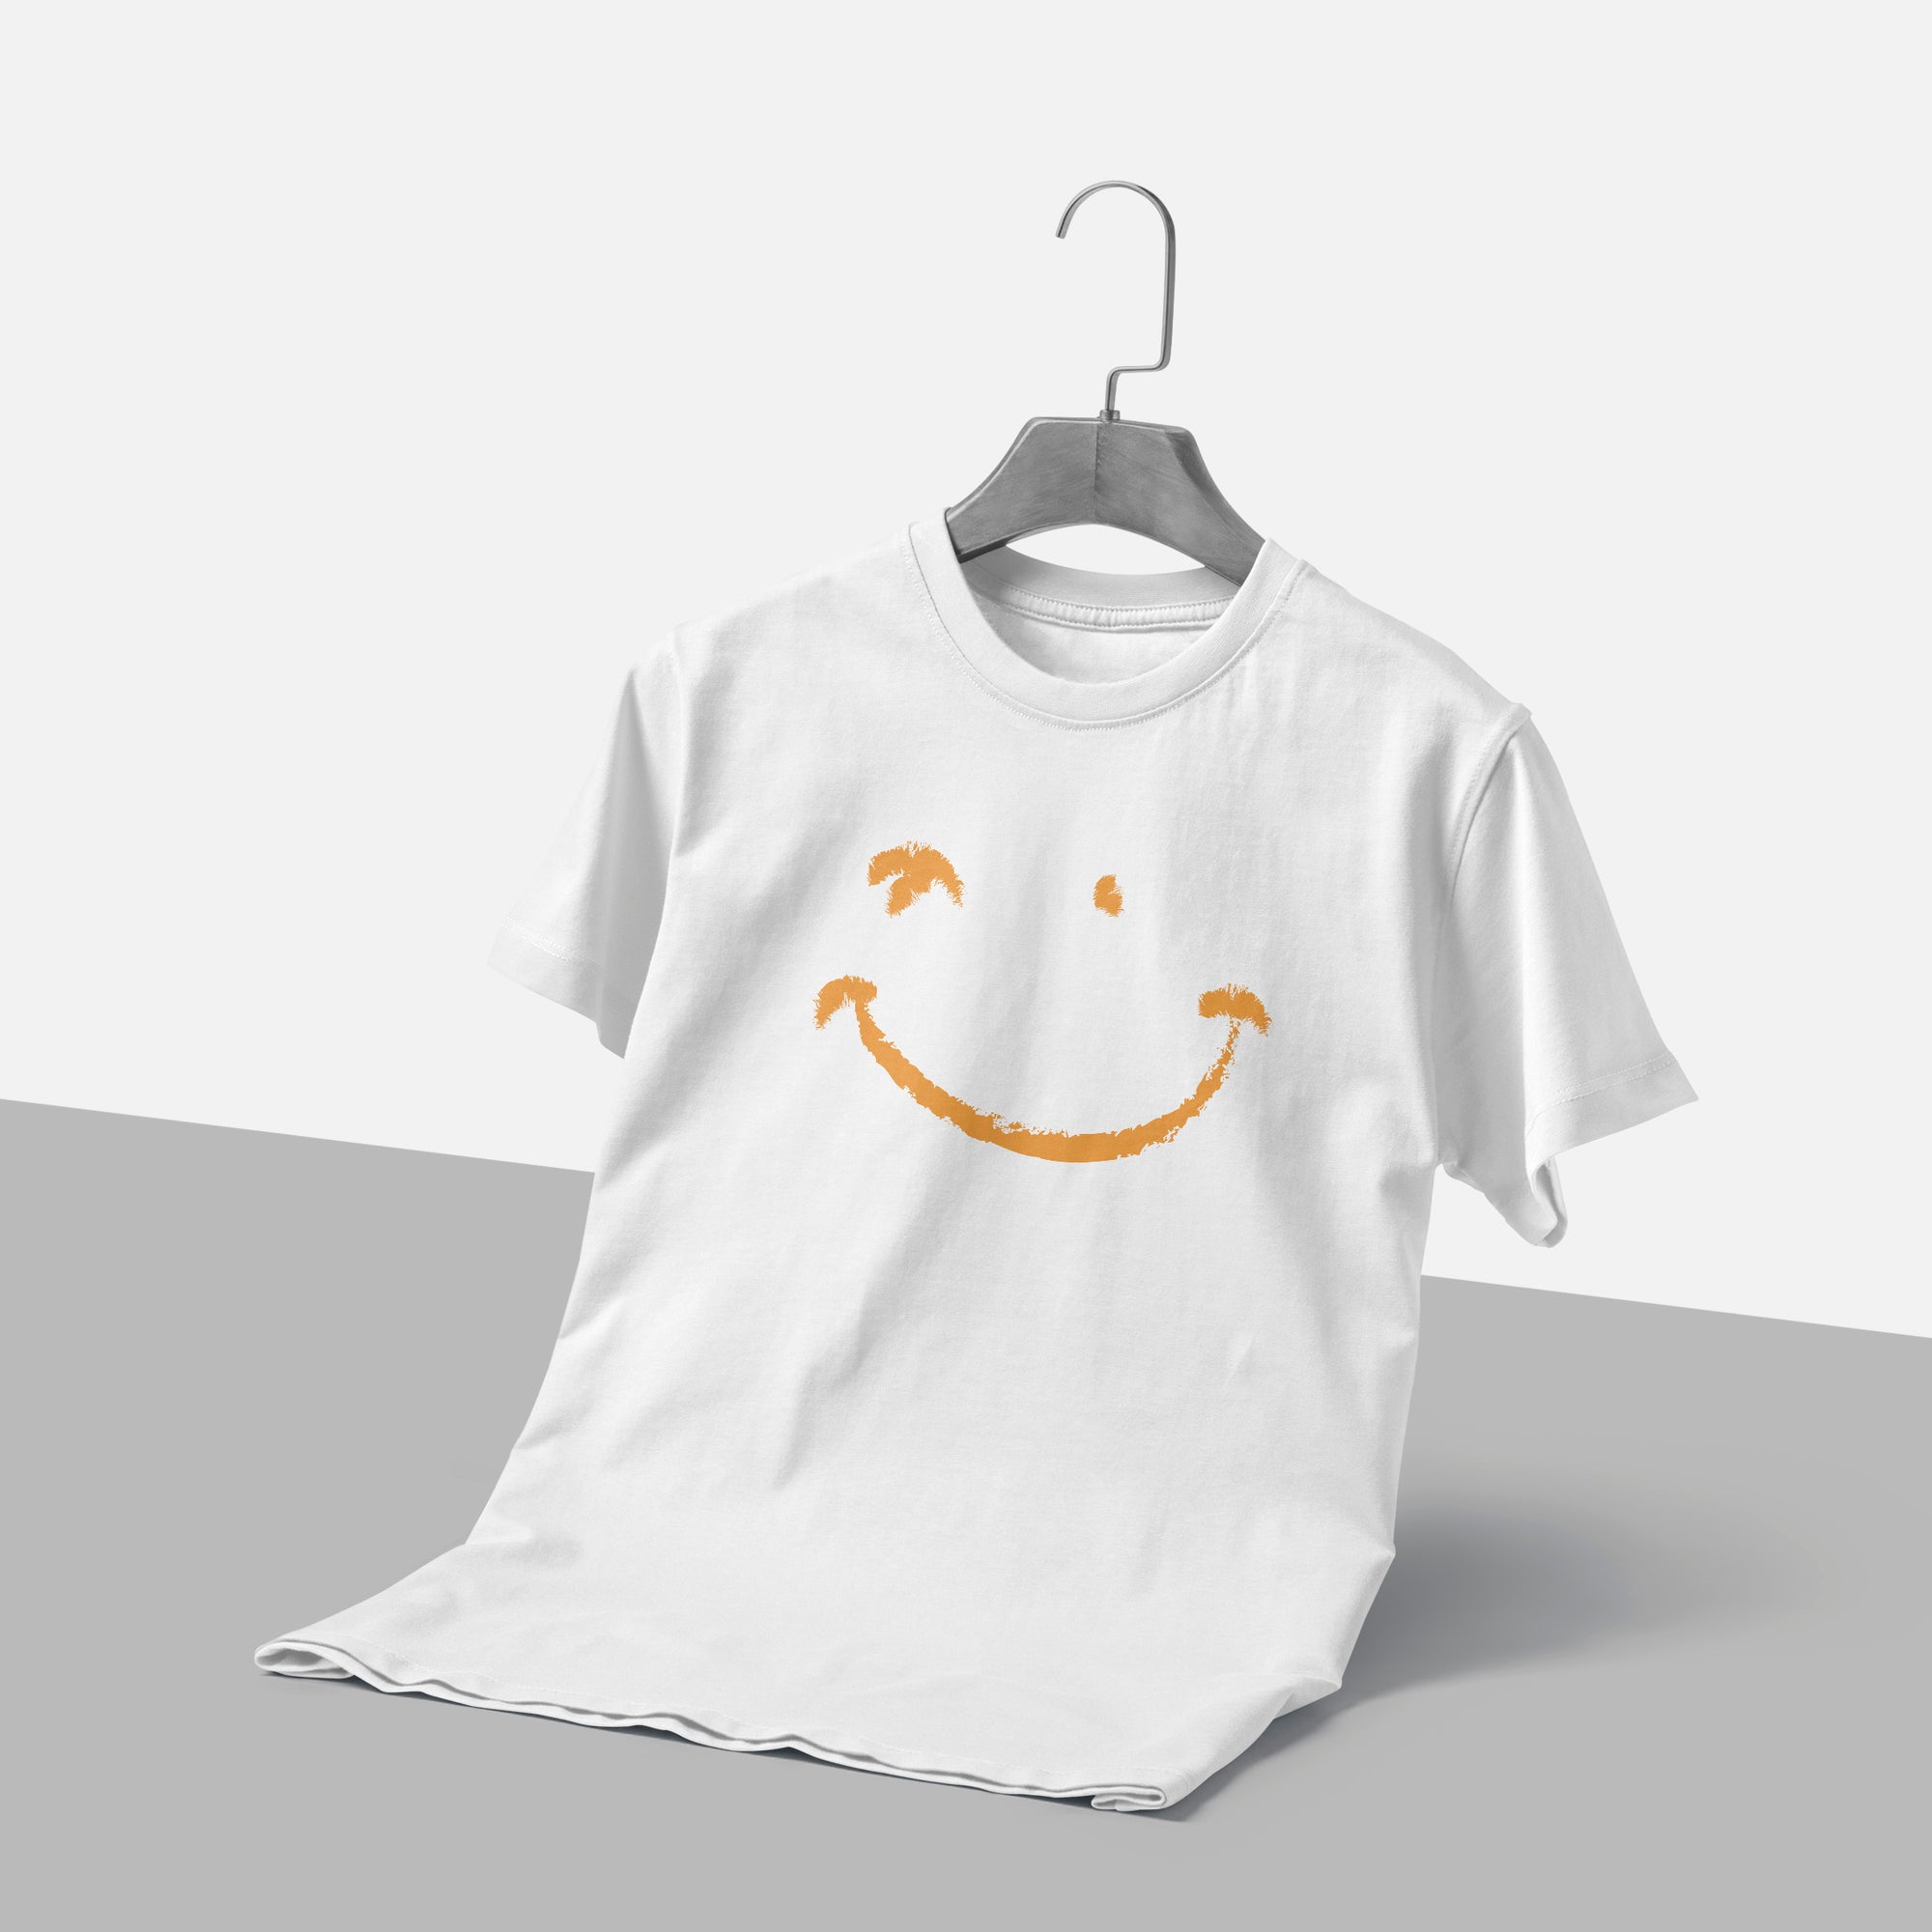 Satisfied Smiley Face with Brush Strokes T-Shirt